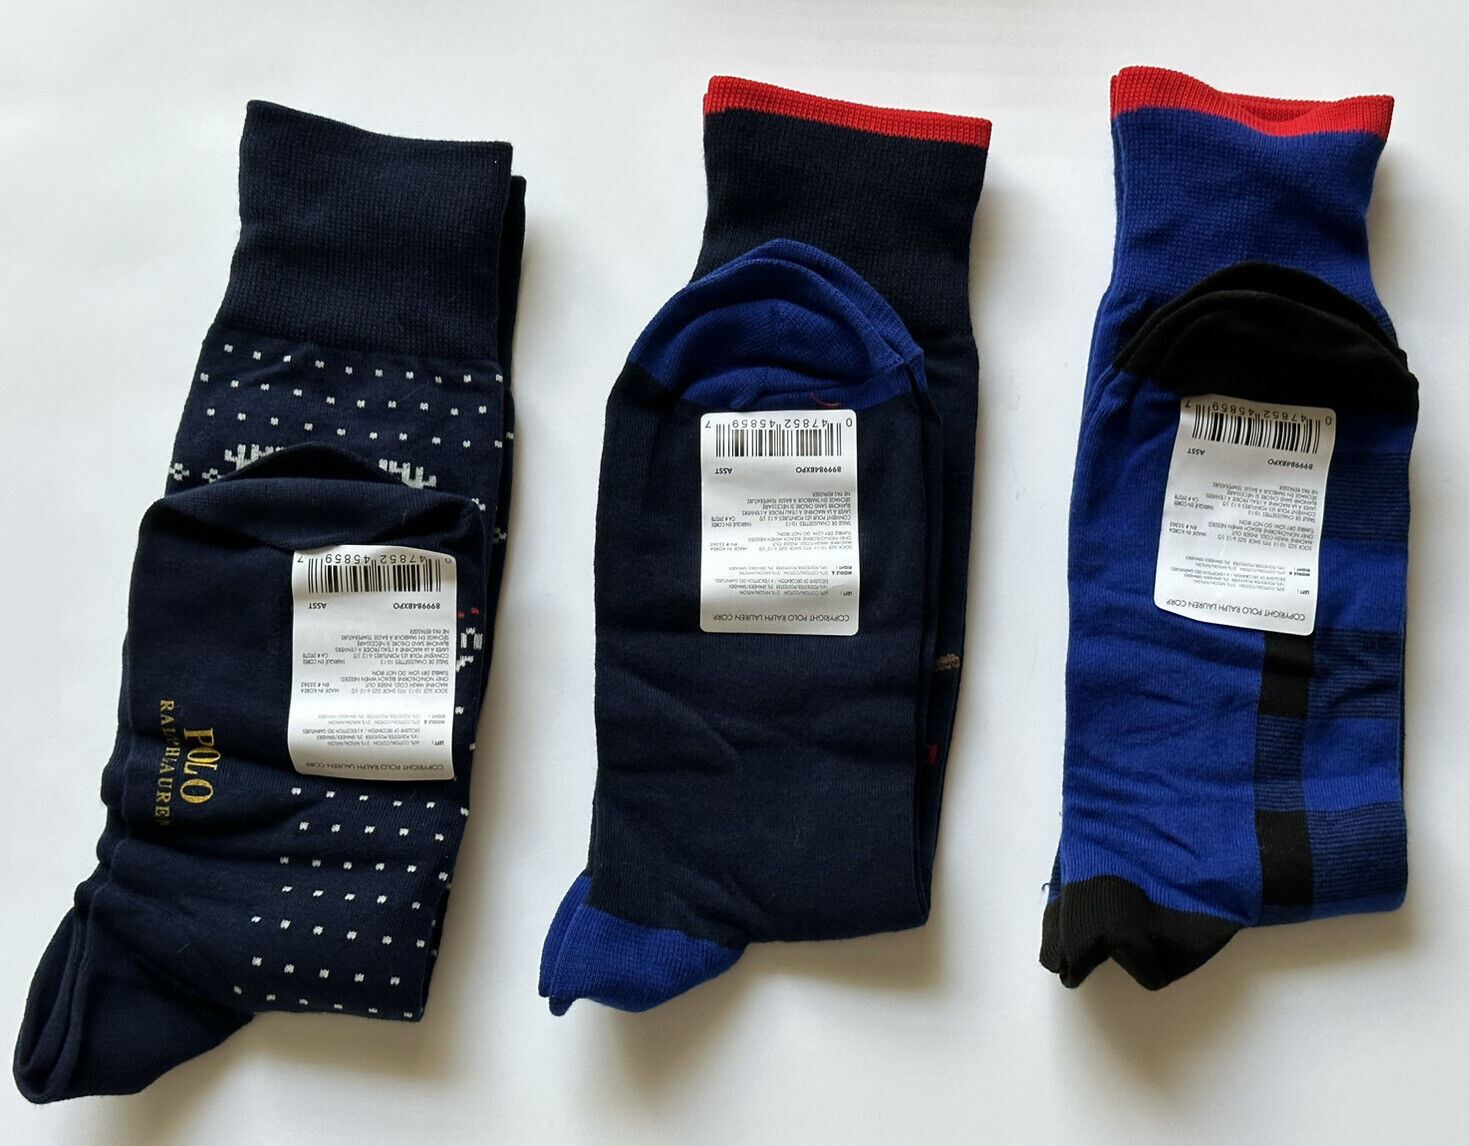 NWT Polo Ralph Lauren Socks Gift Set (3 Pairs)  10-13 Fits Shoe size 6 to 12.5